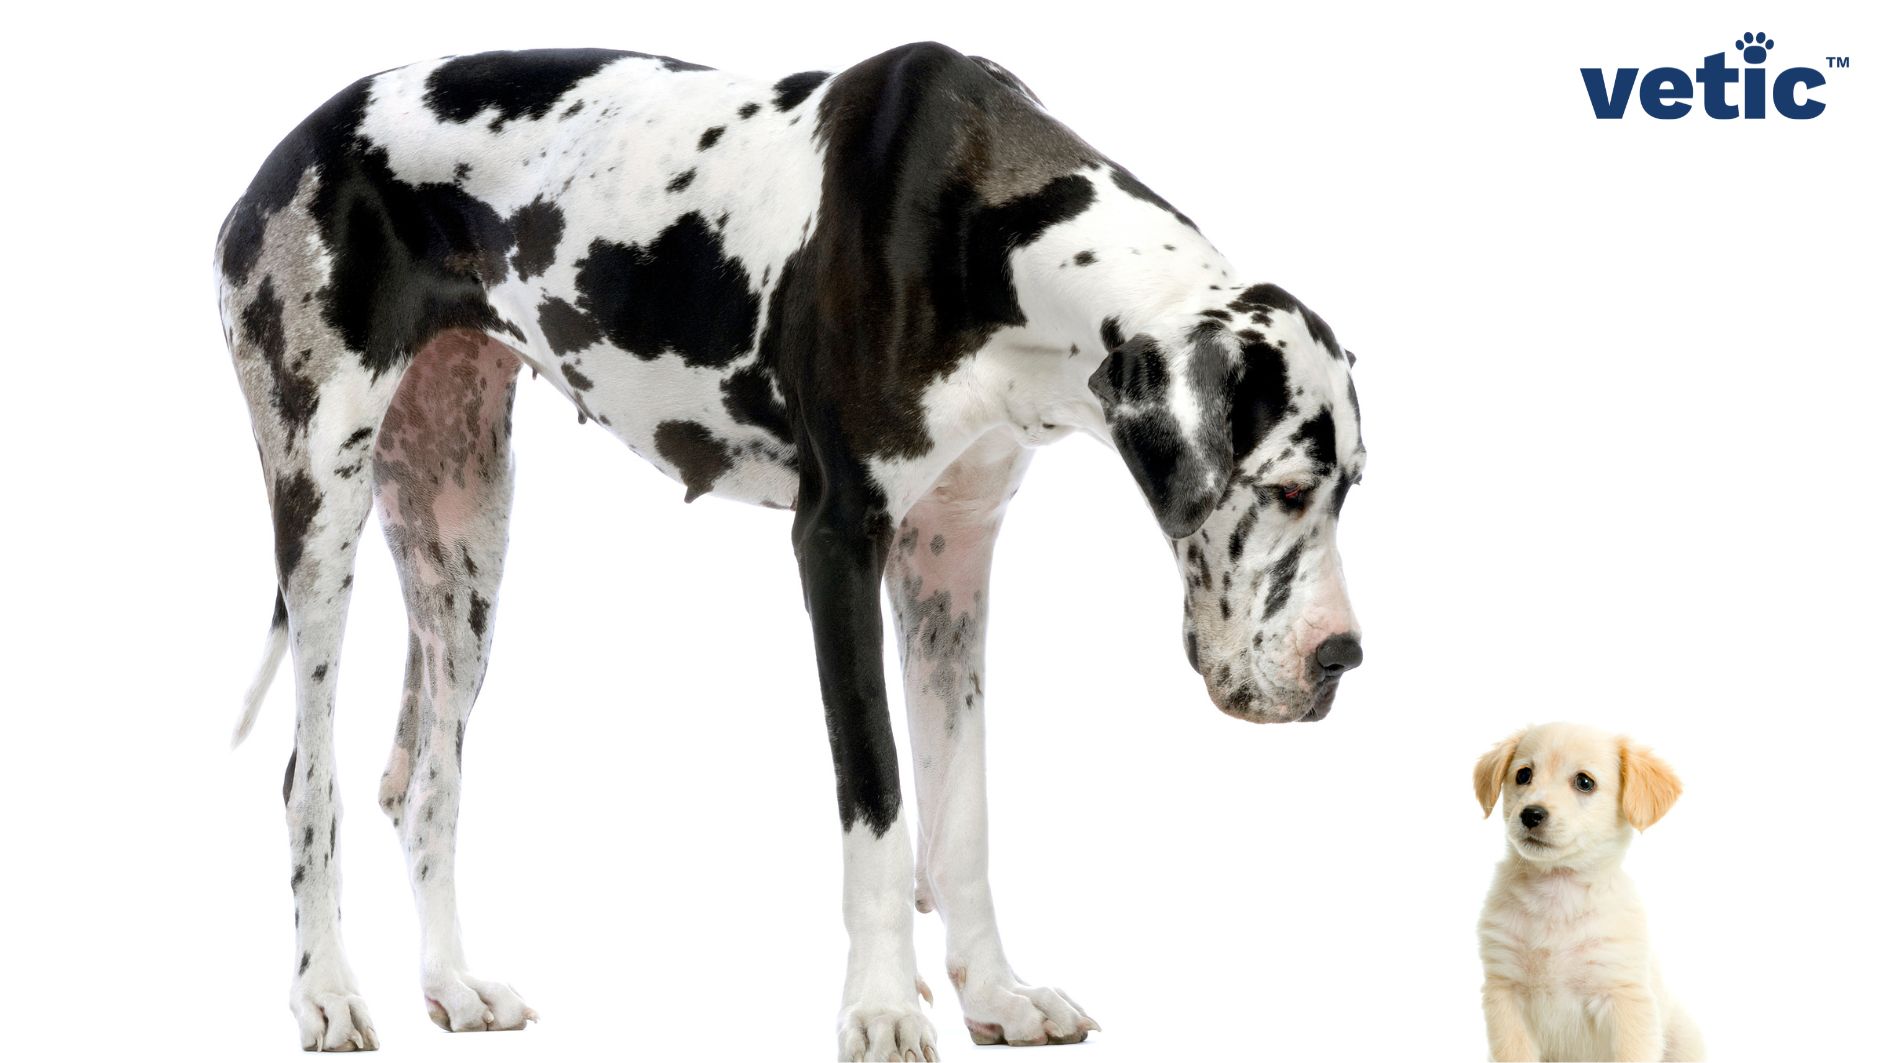 A black and white Great Dane standing on the left looking very curiously at a small fawn labrador puppy sitting on the right. arthritis in dogs are common in the medium and large breeds like these.